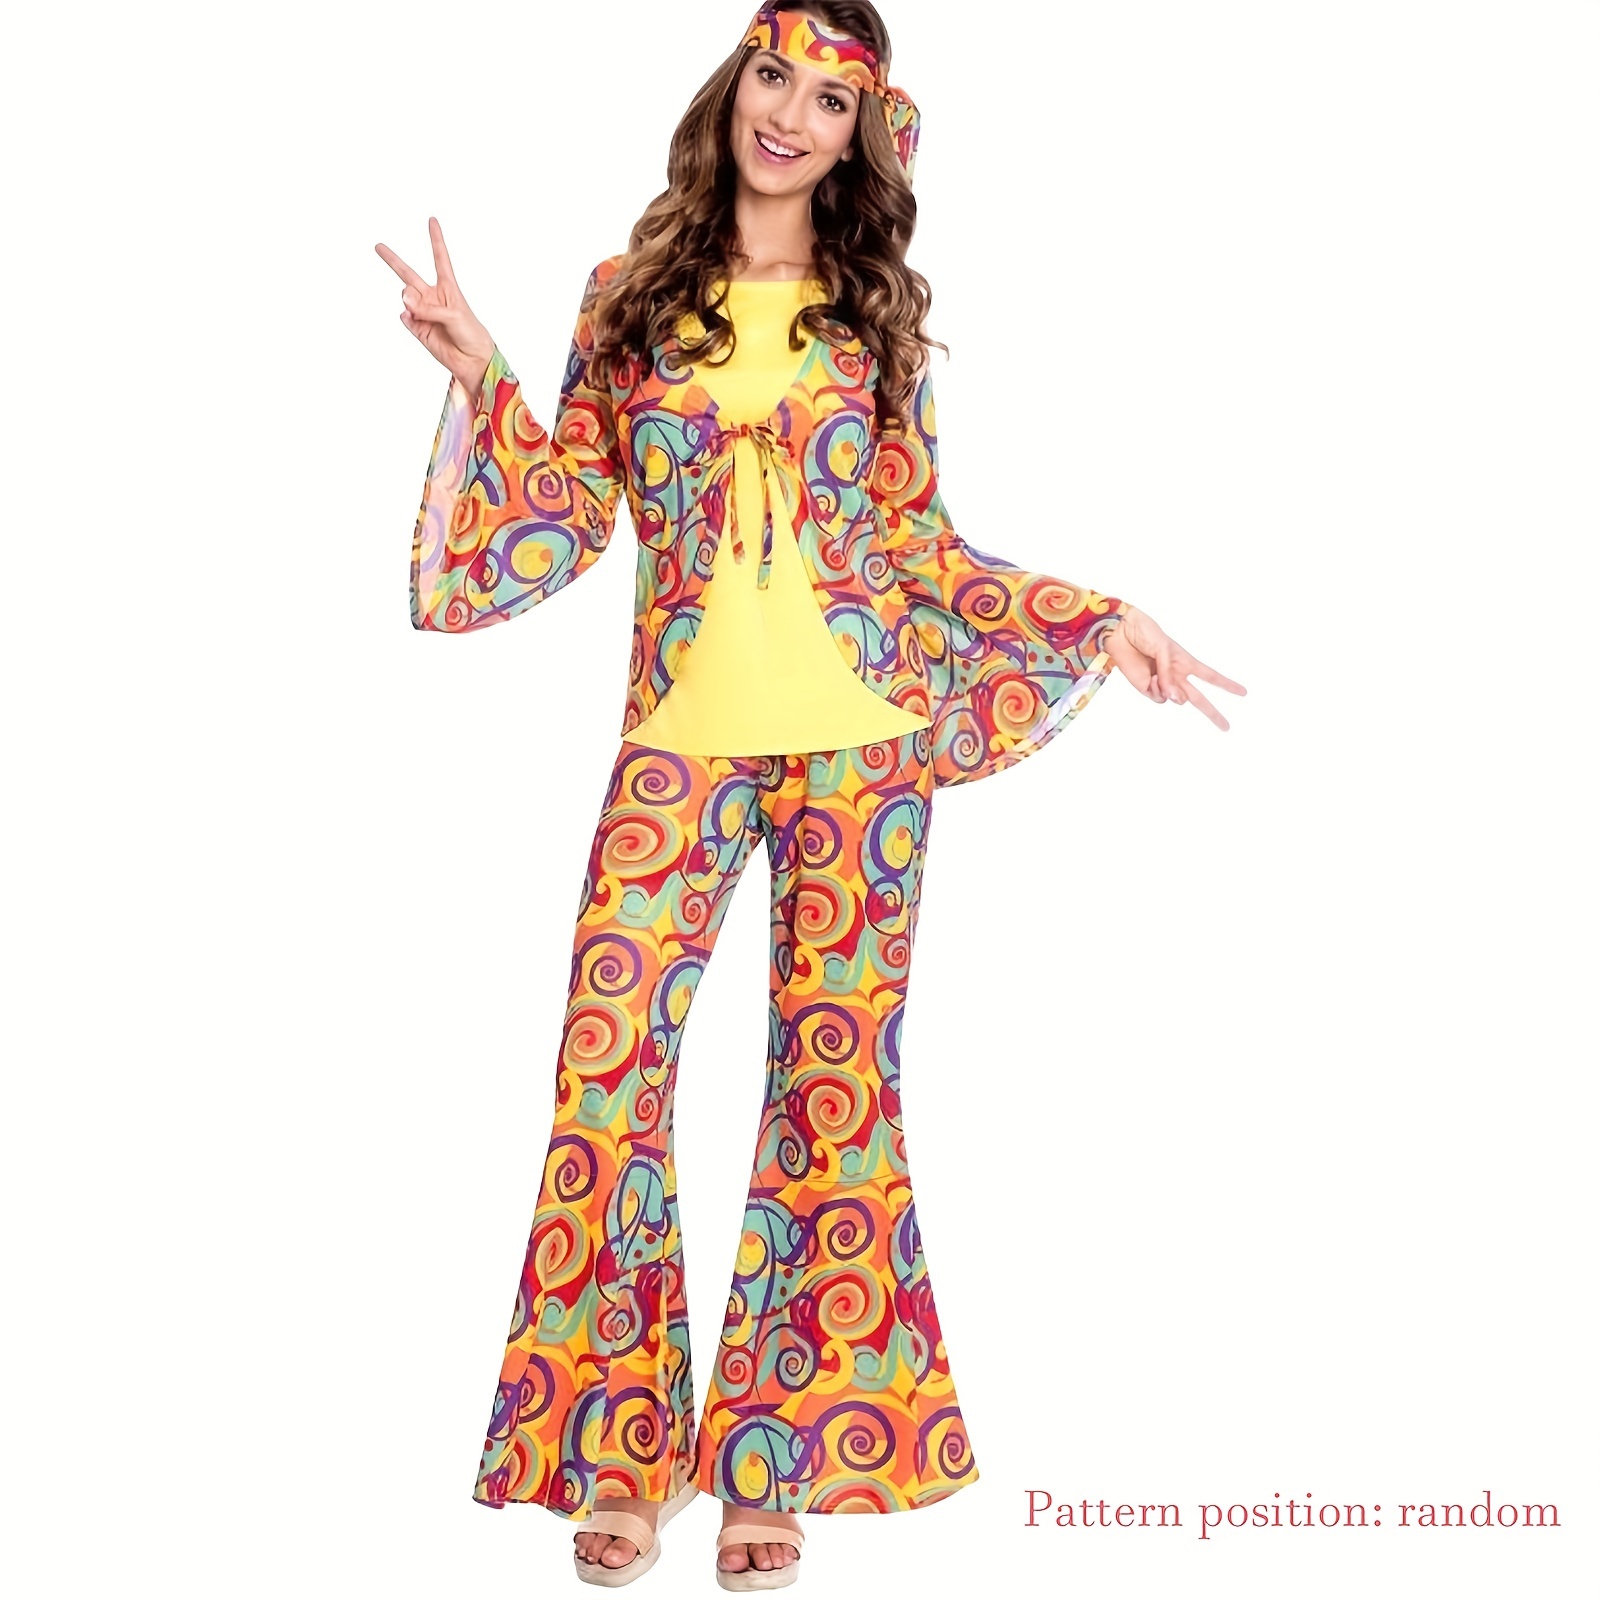 6pcs 70s 60s Hippie Costume Set 70s Outfits Accessories for Halloween Women  Disco Dress for Girls, L